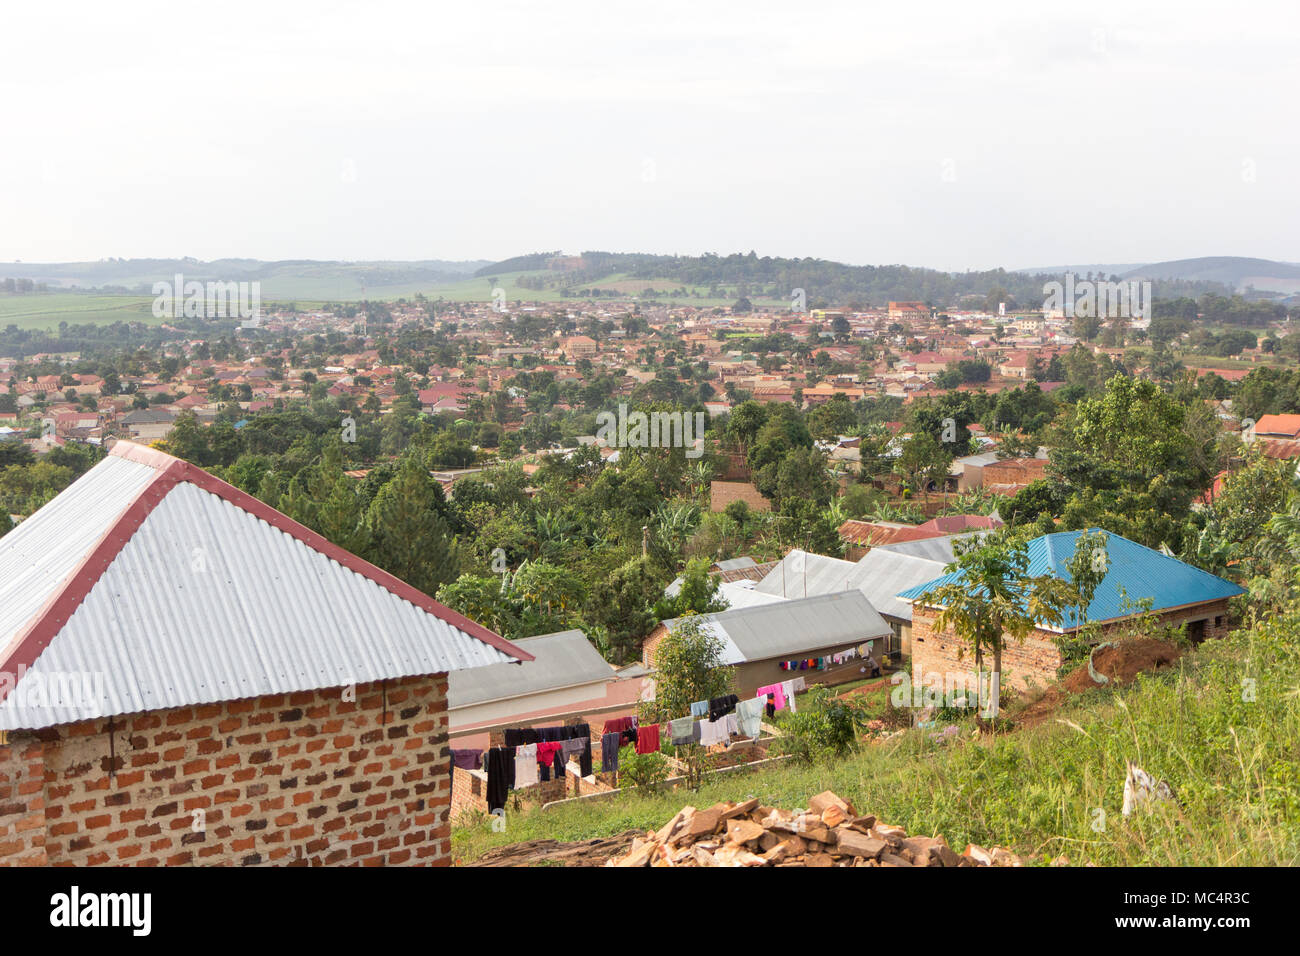 Lugazi, Uganda. June 18 2017. A view of the town of Lugazi and its surroundings from the top of a mountain where a quarry is found. Stock Photo